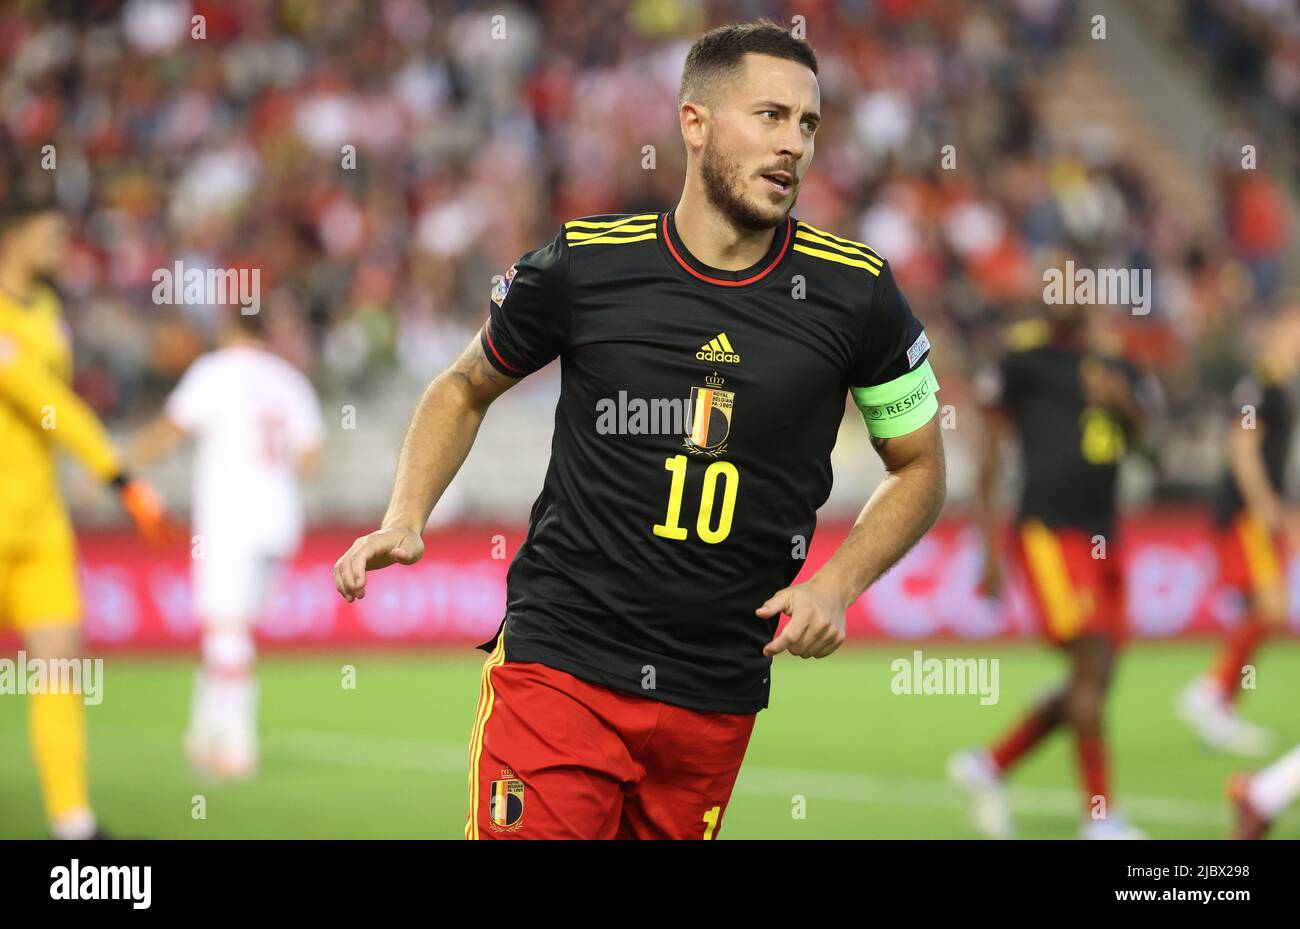 Gør gulvet rent Bløde cylinder Belgium's Eden Hazard pictured during a soccer game between Belgian  national team the Red Devils and Poland, Wednesday 08 June 2022 in  Brussels, the second game (out of six) in the Nations